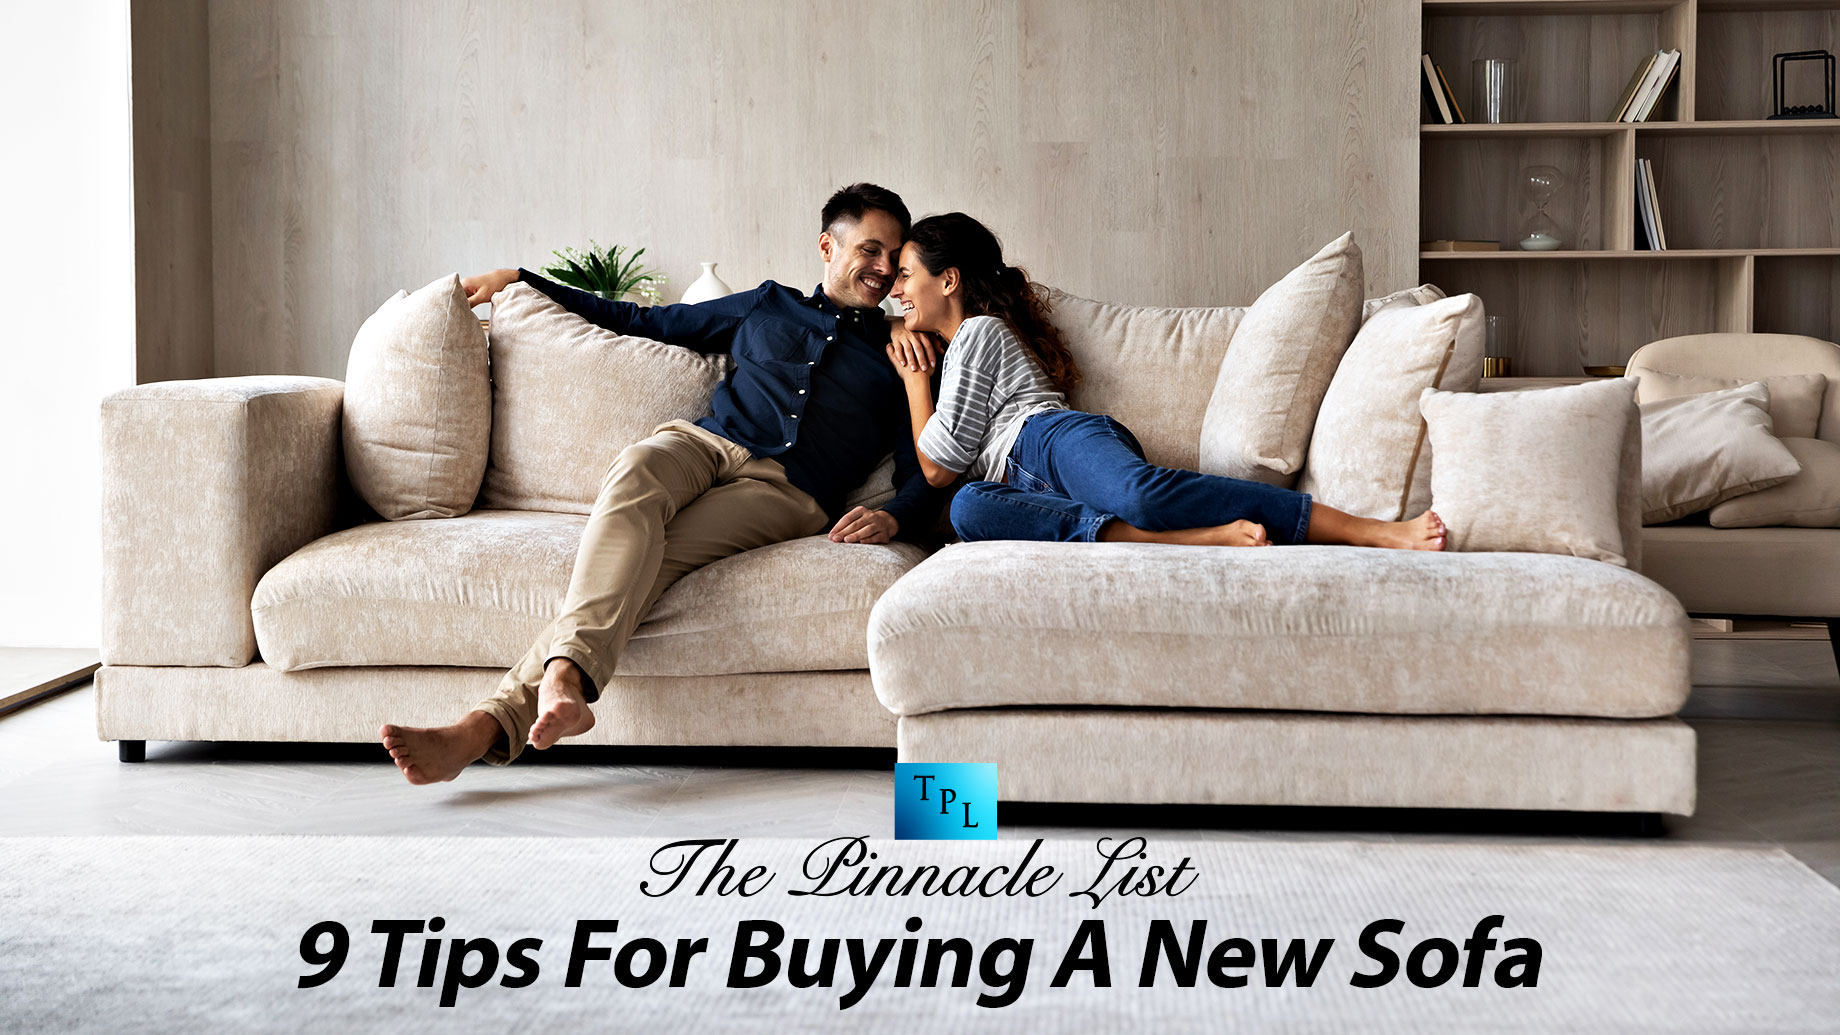 9 Tips For Buying A New Sofa